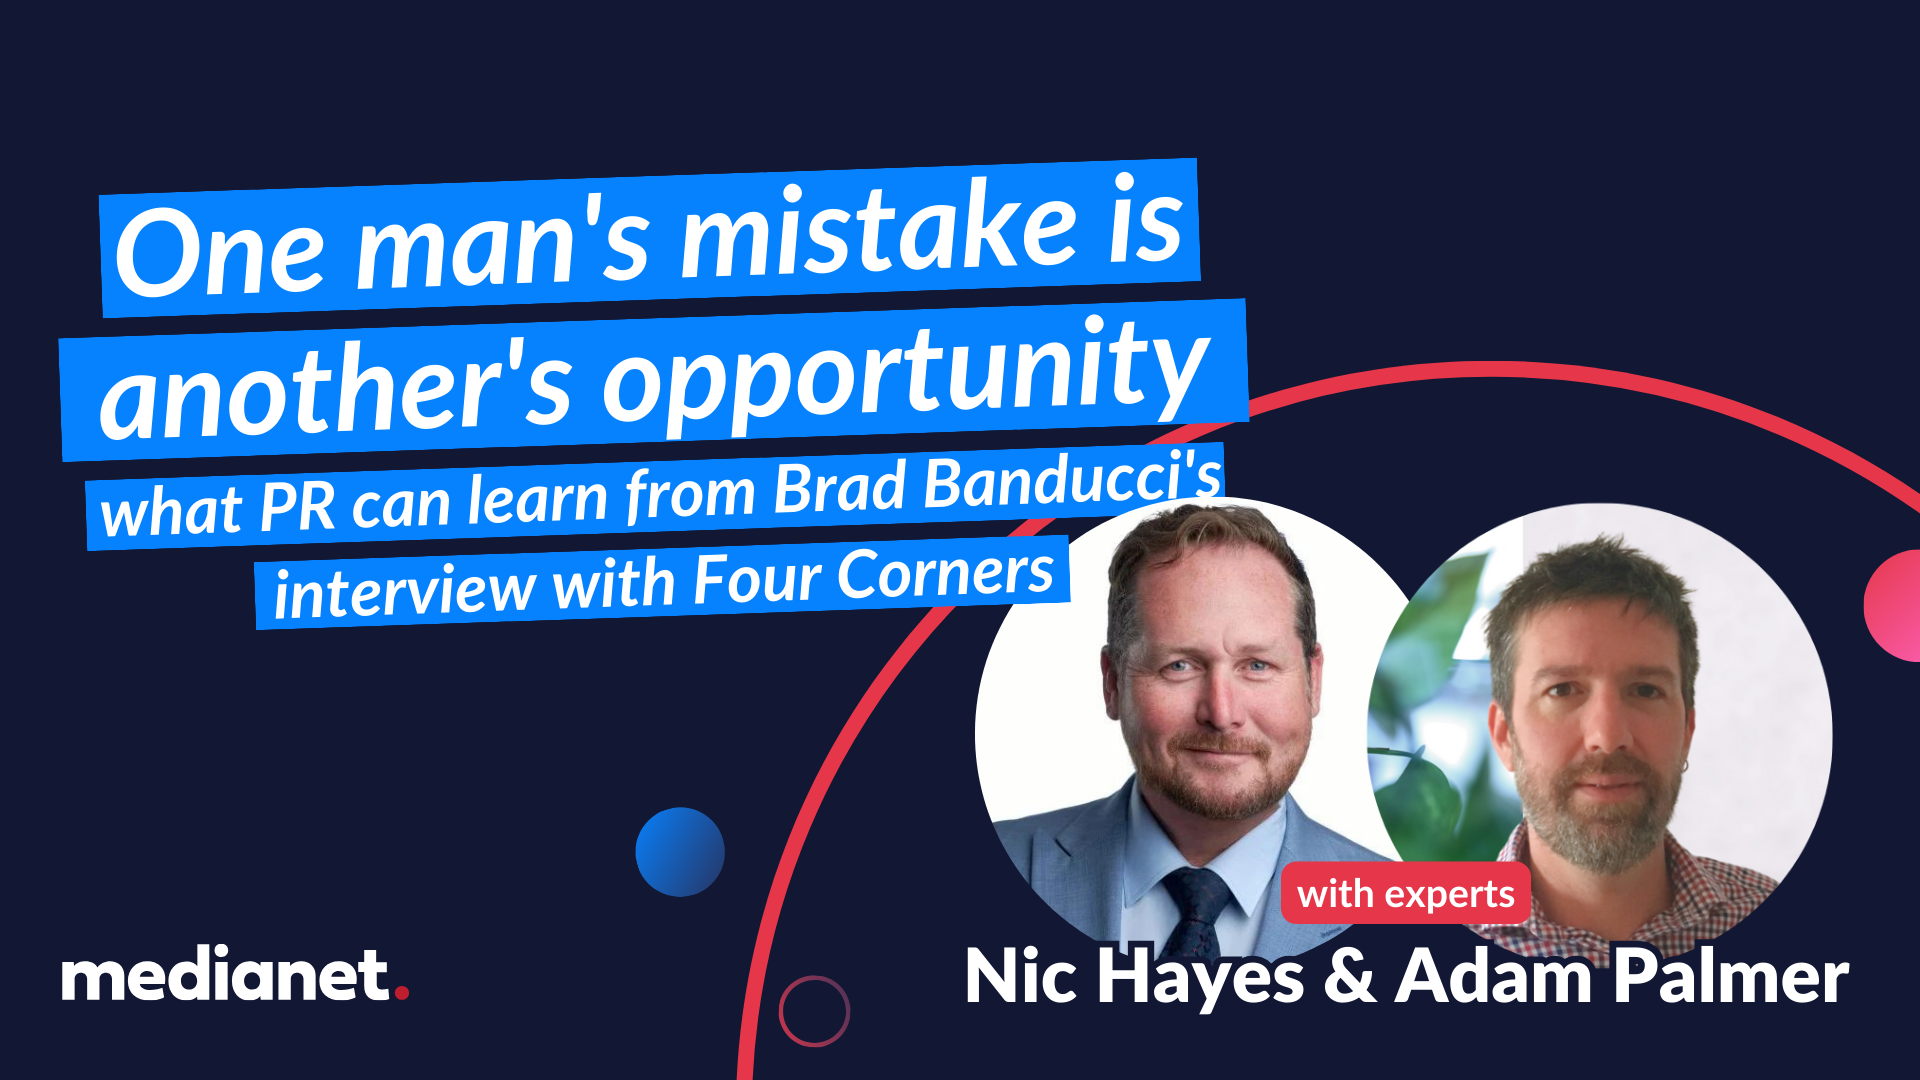 One man's mistake is another's opportunity - what PR can learn from Brad Banducci's interview with Four Corners